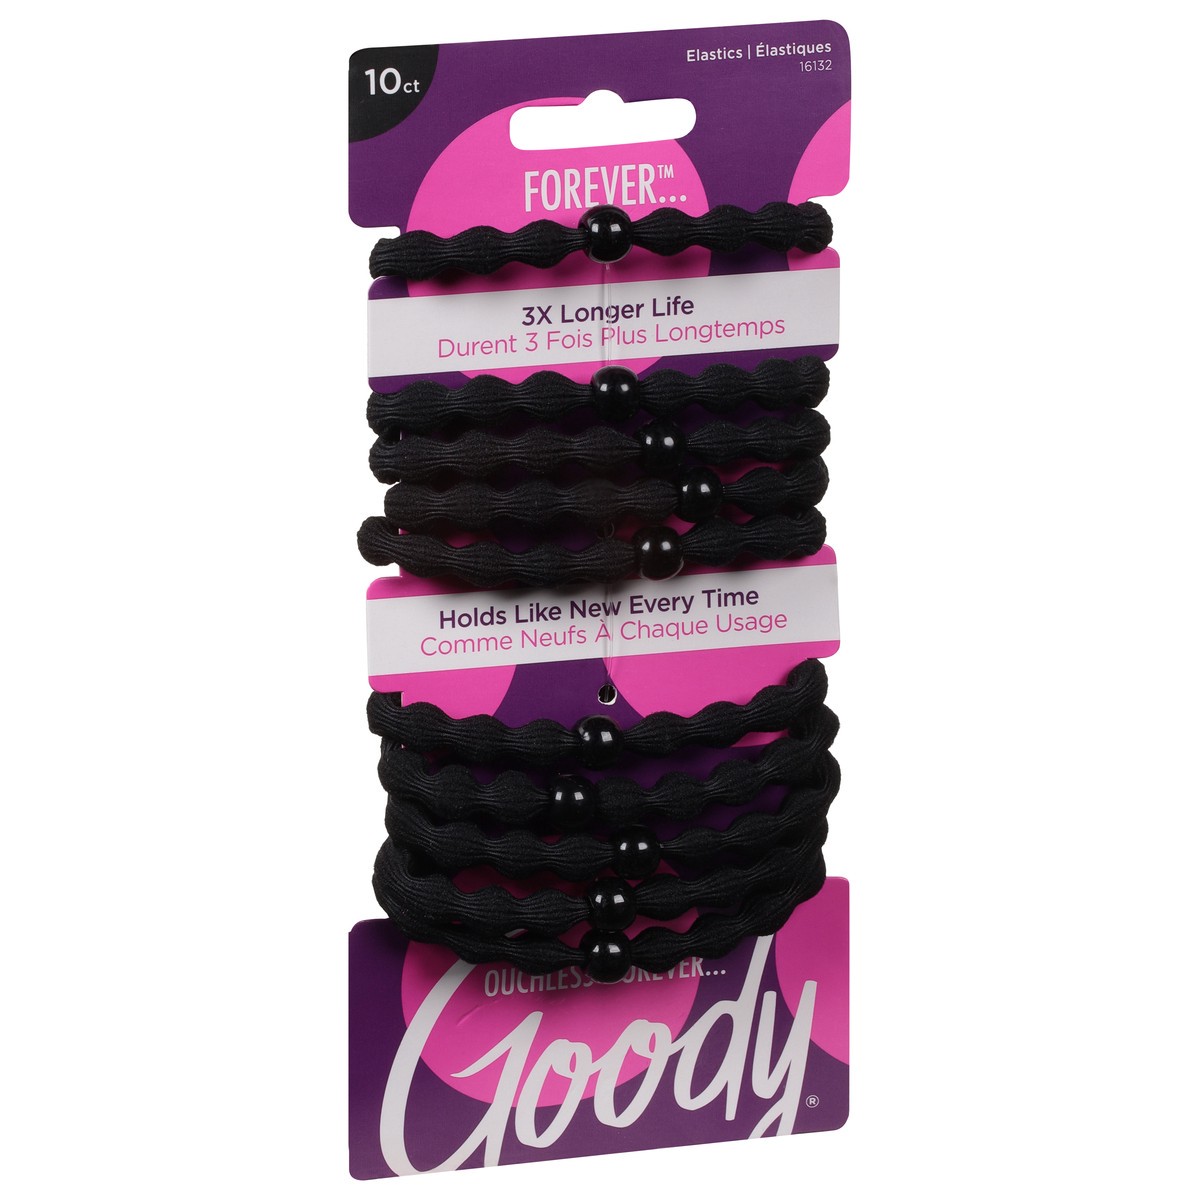 slide 2 of 9, Goody Ouchless Forever Elastics 10 ea, 10 ct